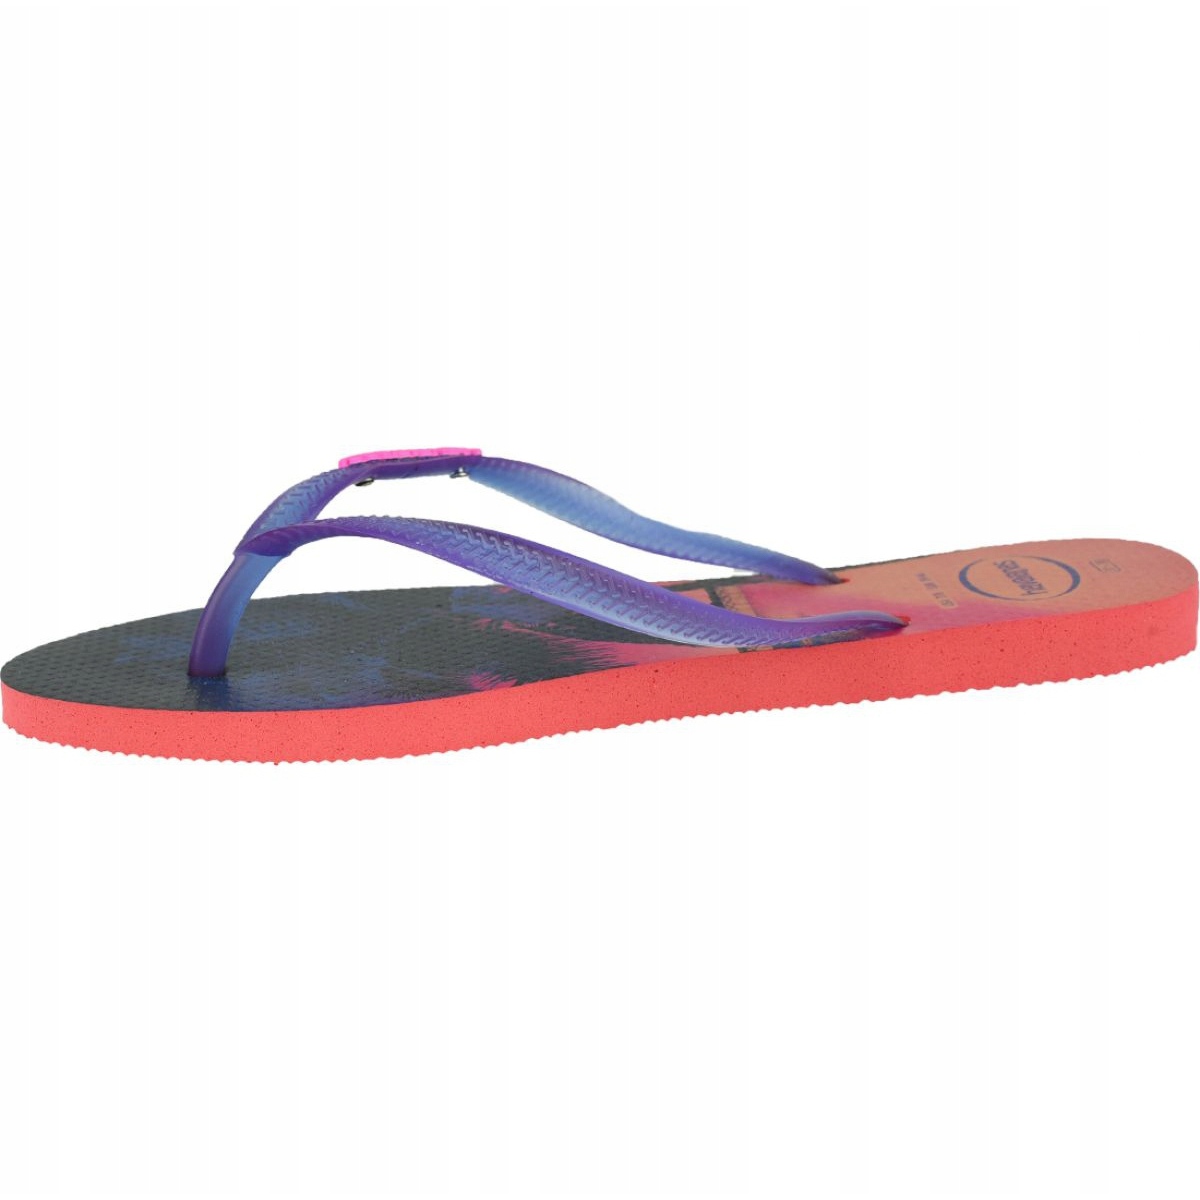 navy and pink havaianas